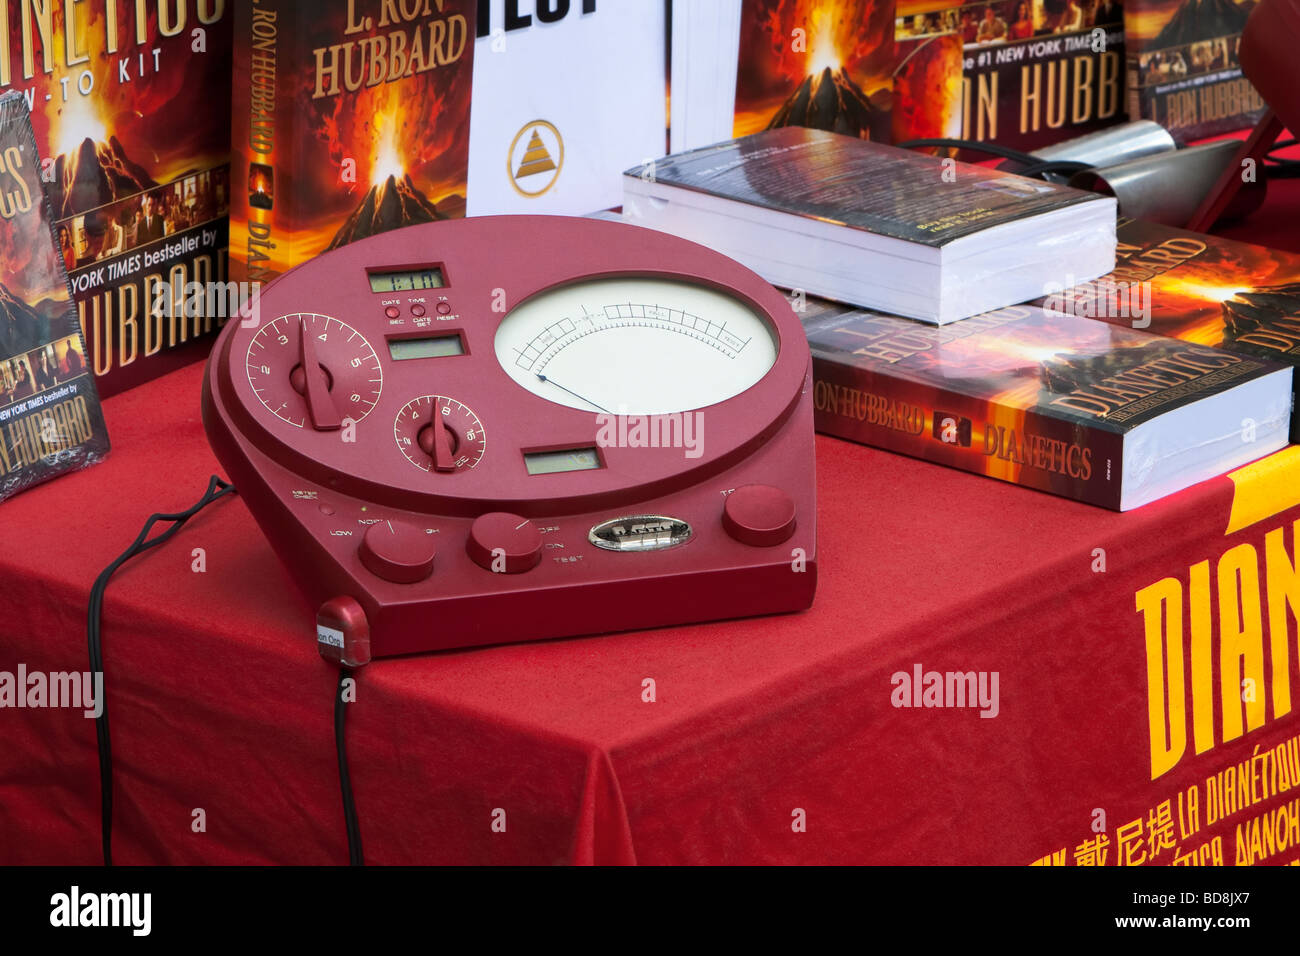 Stress meter and dianetics books at the scientology centre in London, UK Stock Photo